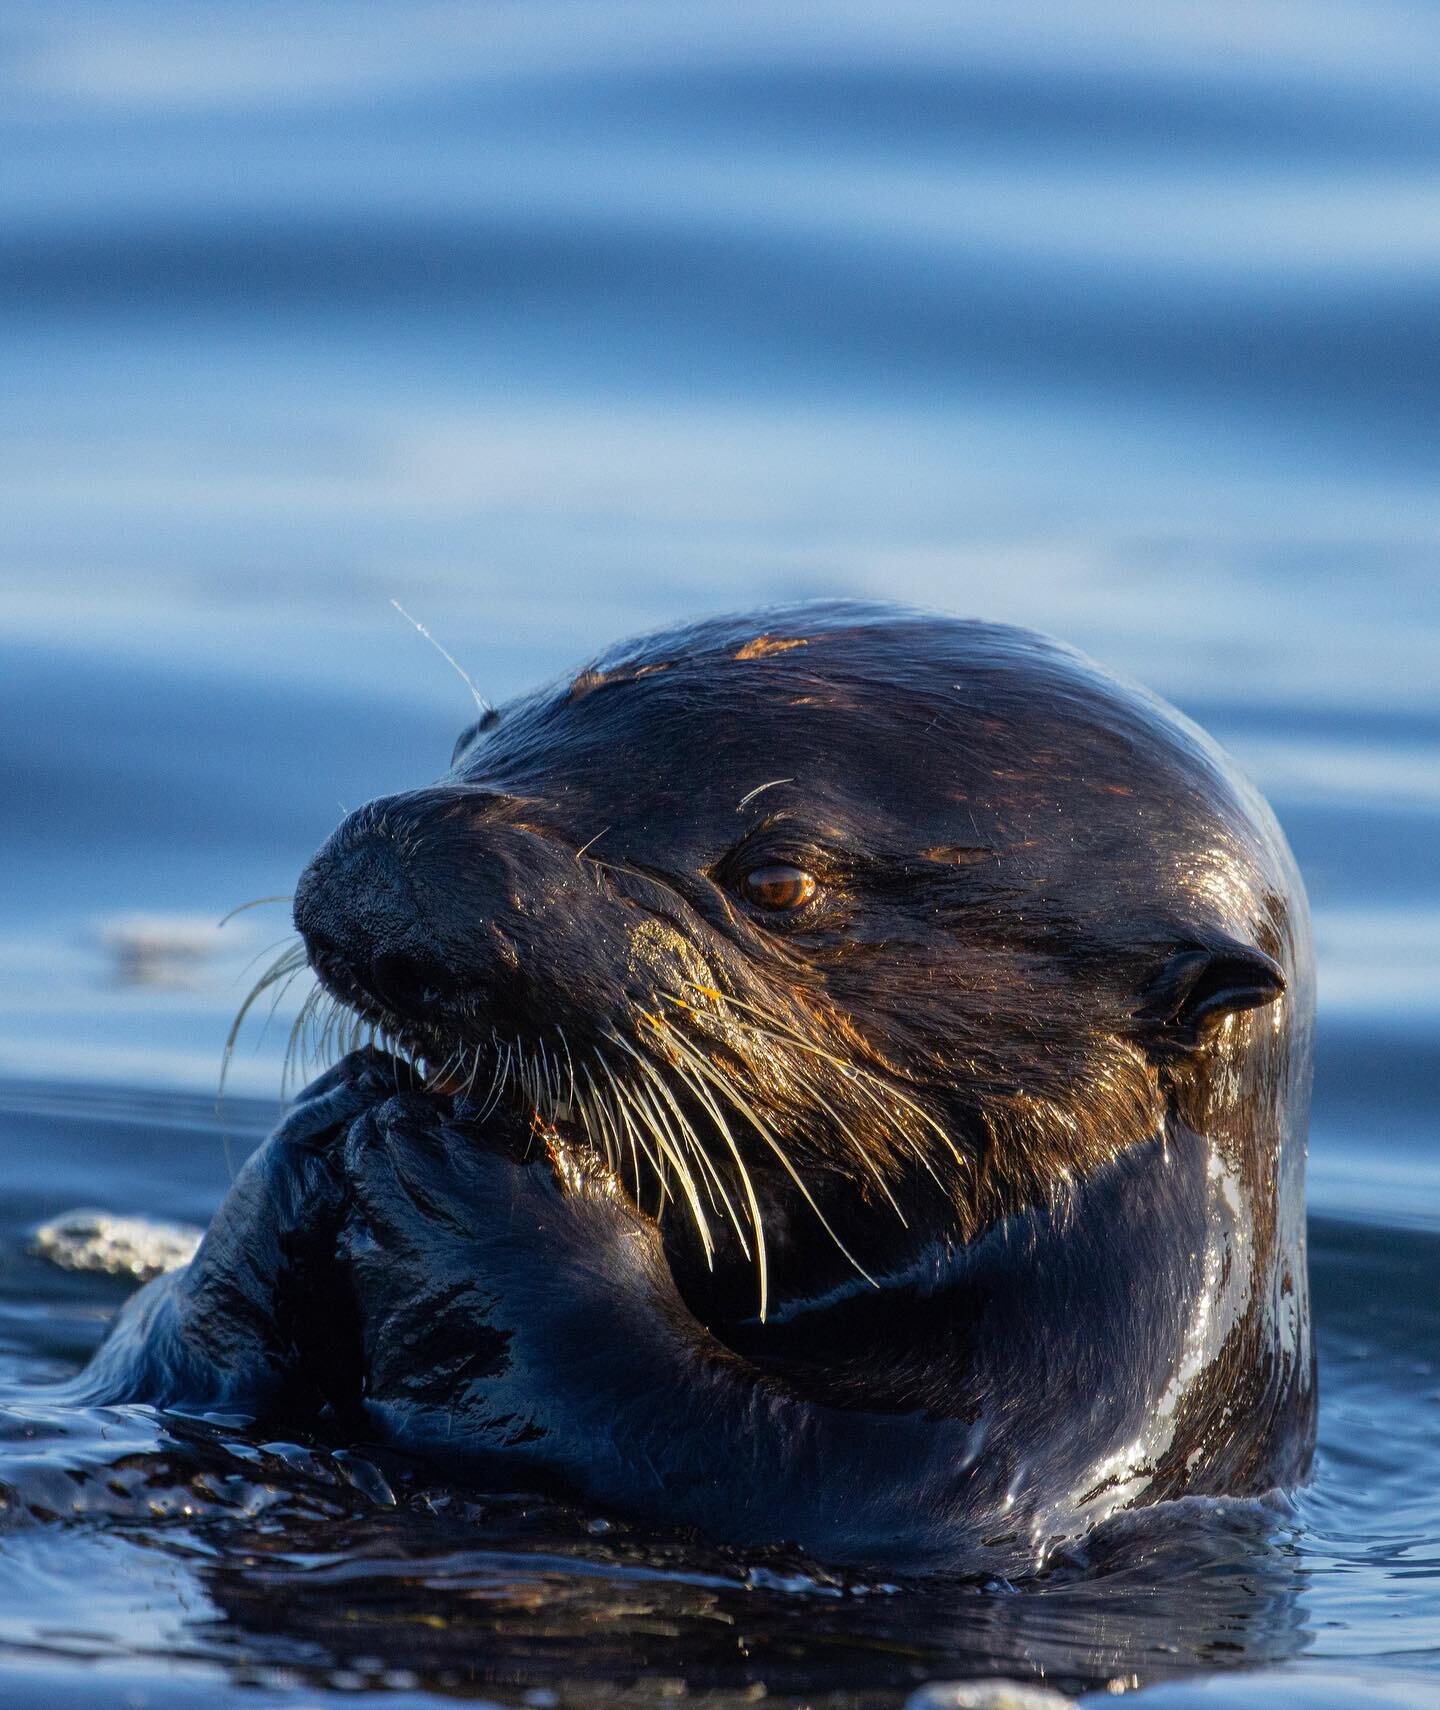 When I first reviewed this photo, I was so excited to see the detail in the sea otter&rsquo;s eye! The warm light from the sunset landed just right to allow me to see so much detail! 

Want to learn more about sea otter vision? @seaottersavvy has a w